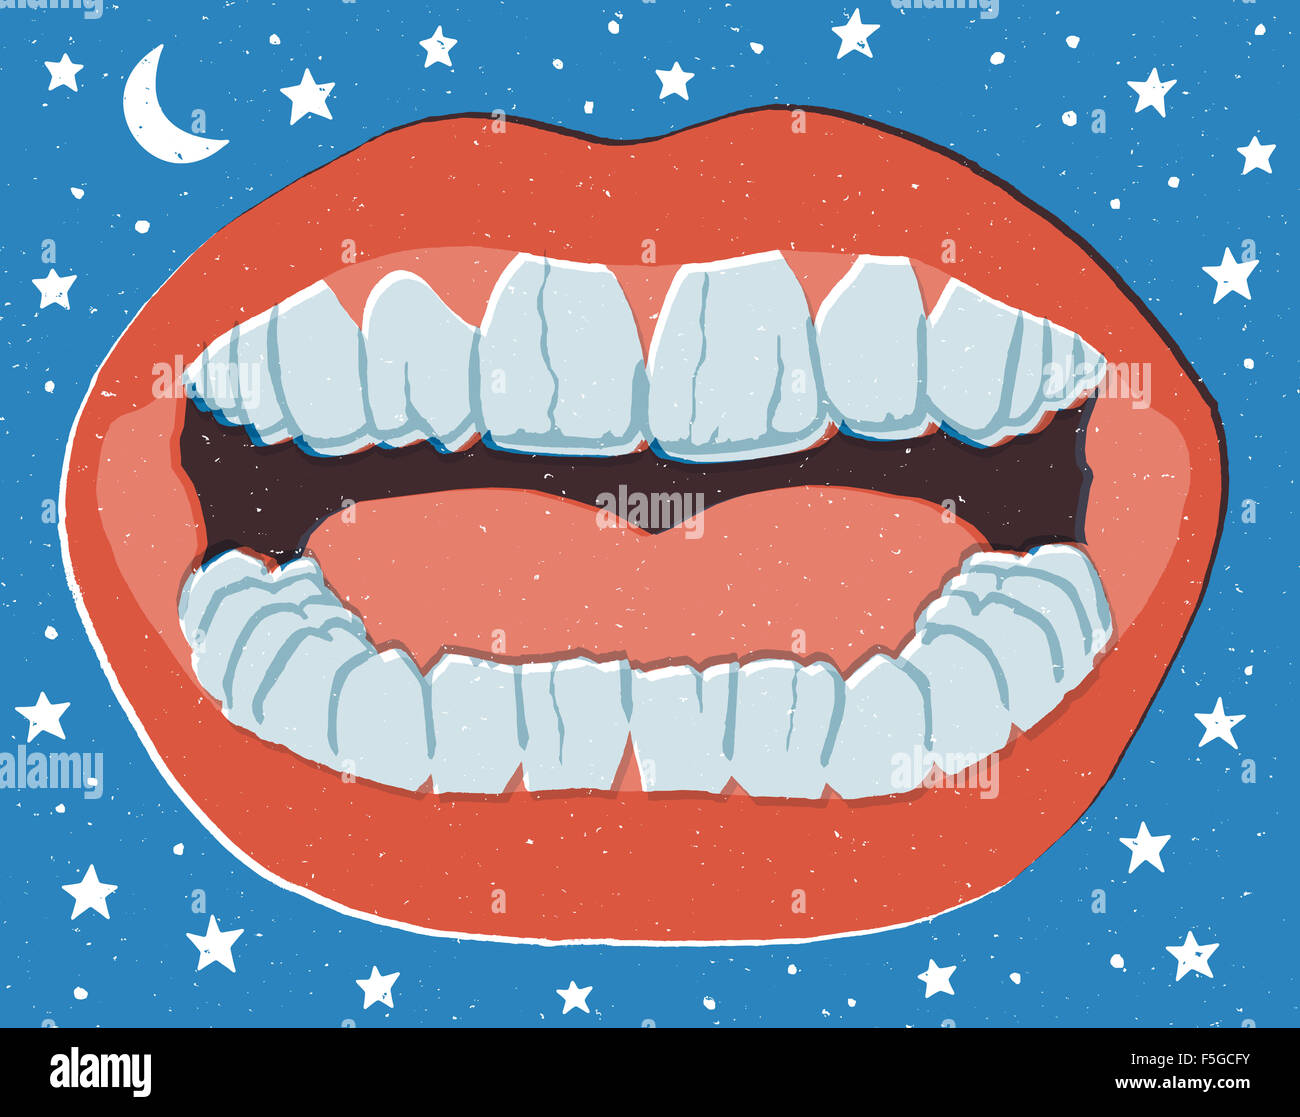 Snapping Jaw Syndrome. Snapping jaw shut during sleep. Stock Photo